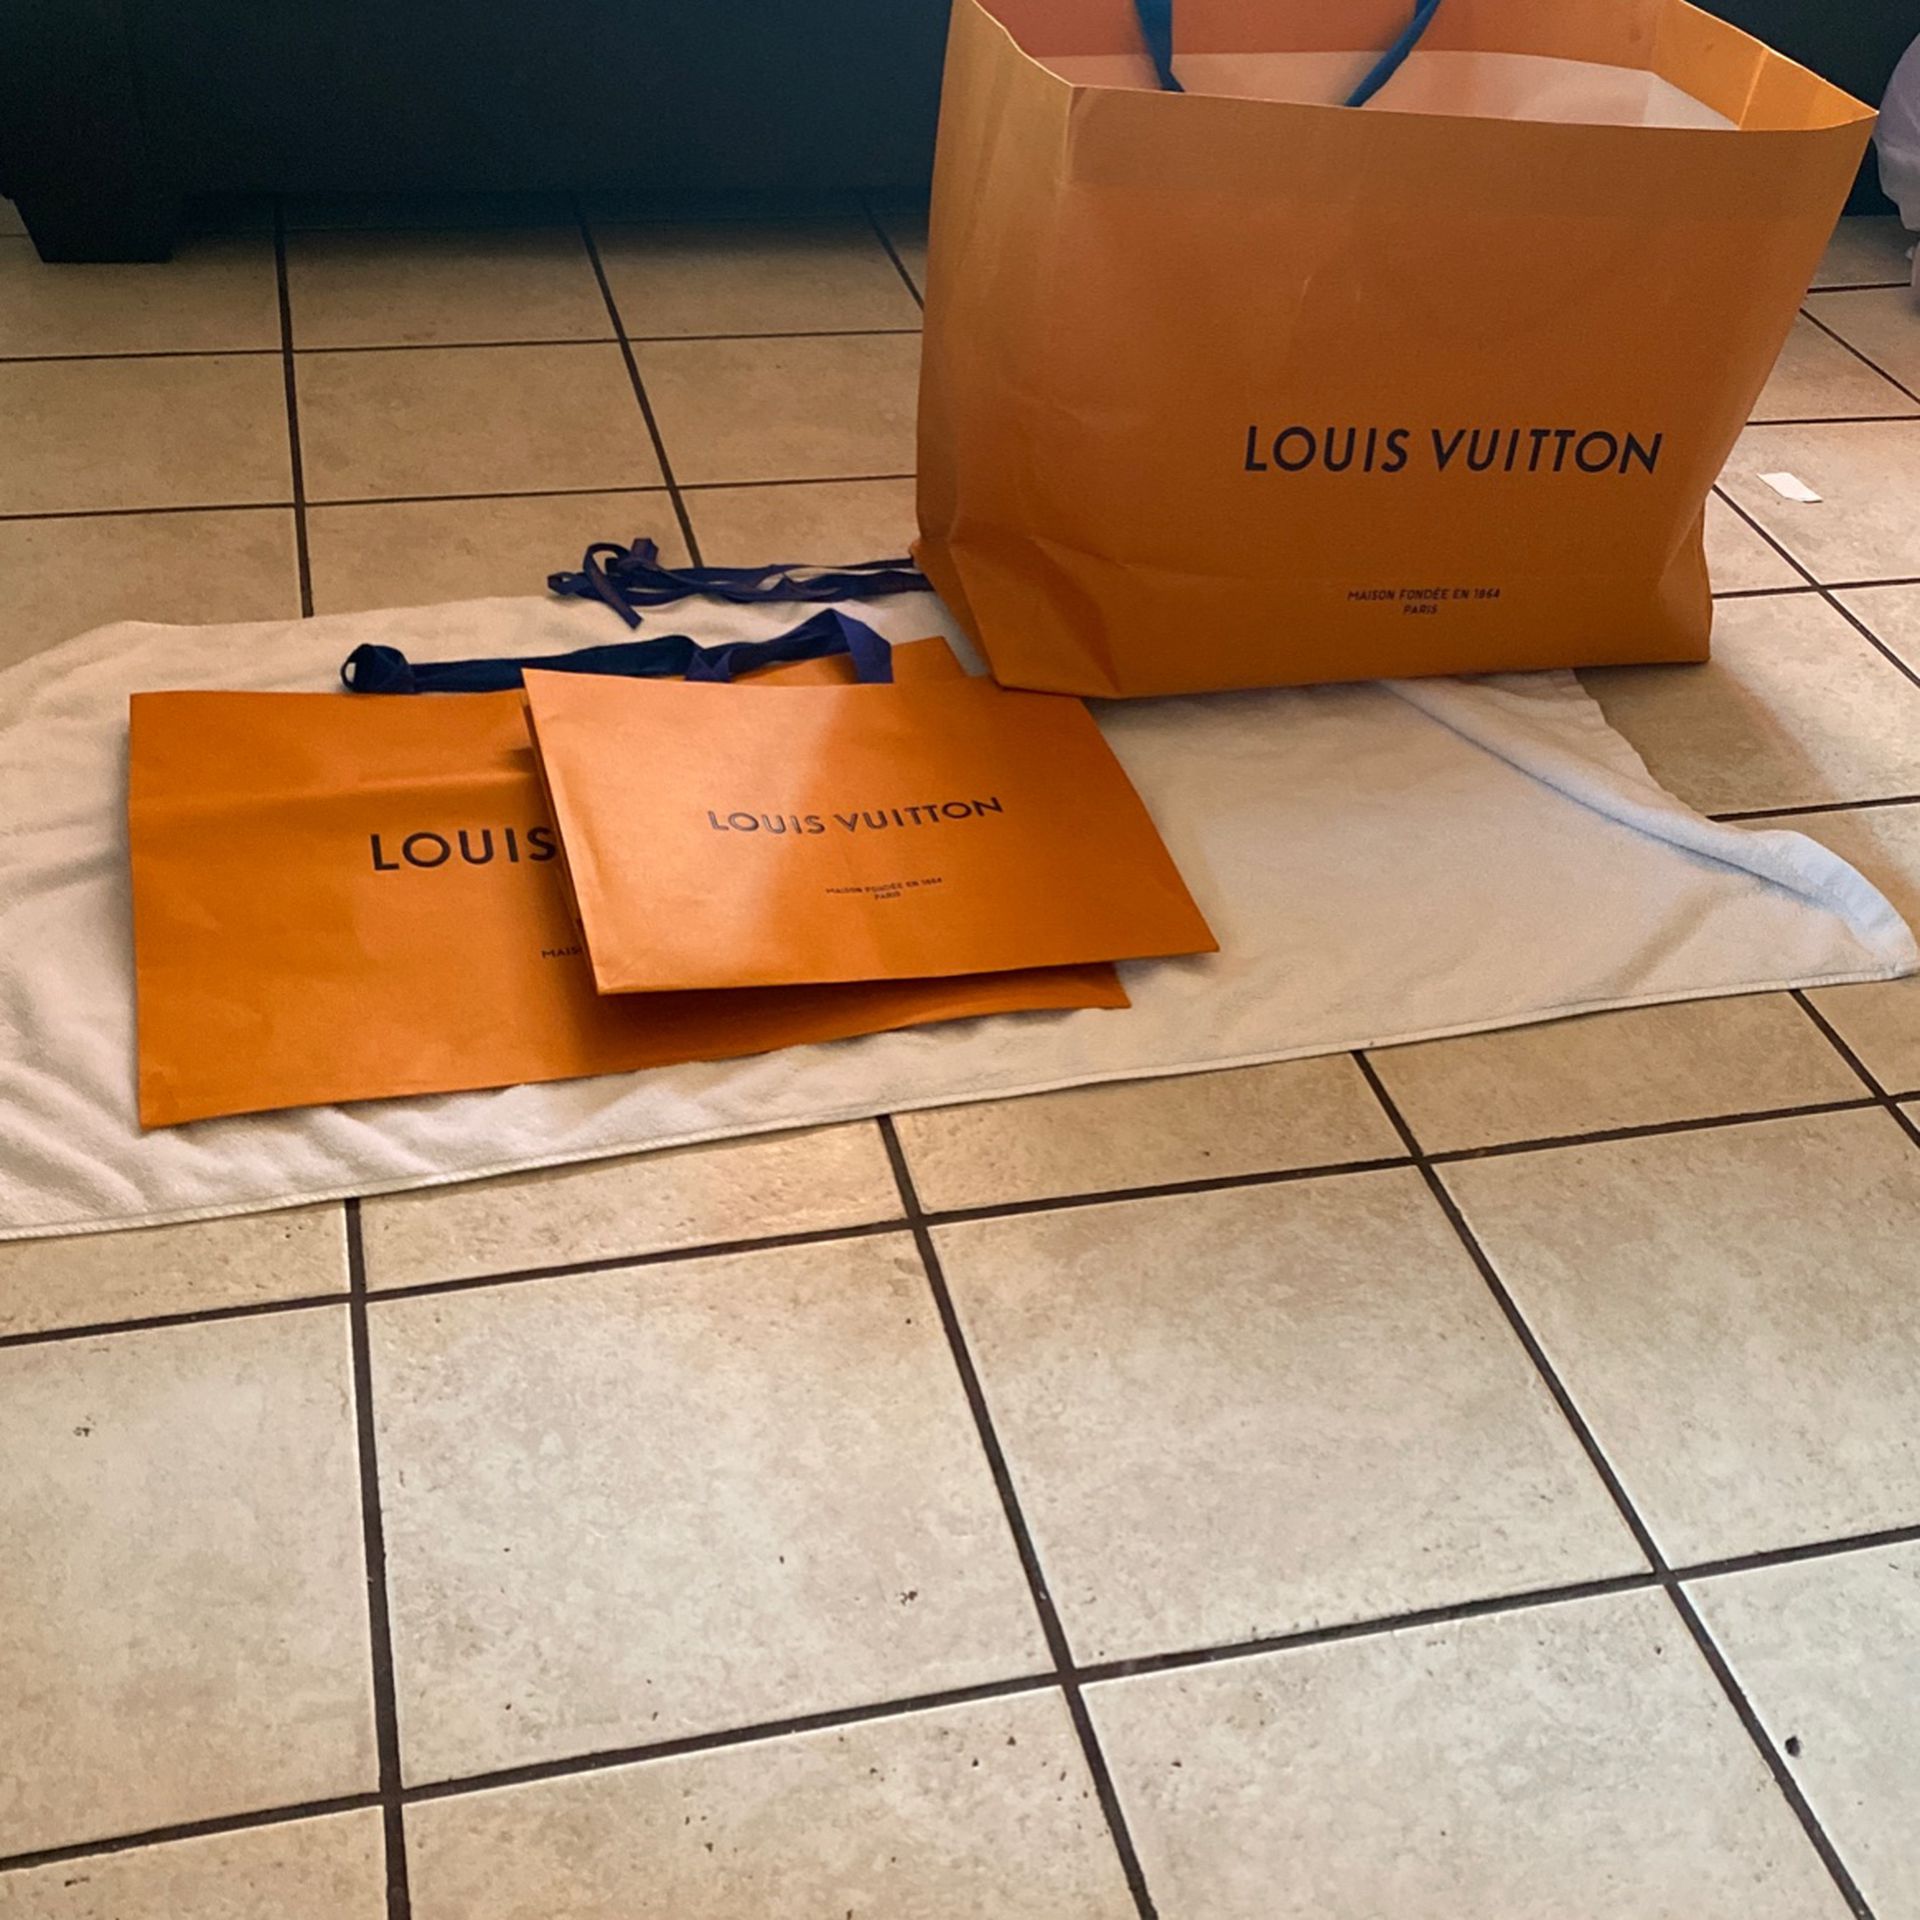 Louis Vuitton Bags Empty for Sale in Los Angeles, CA - OfferUp